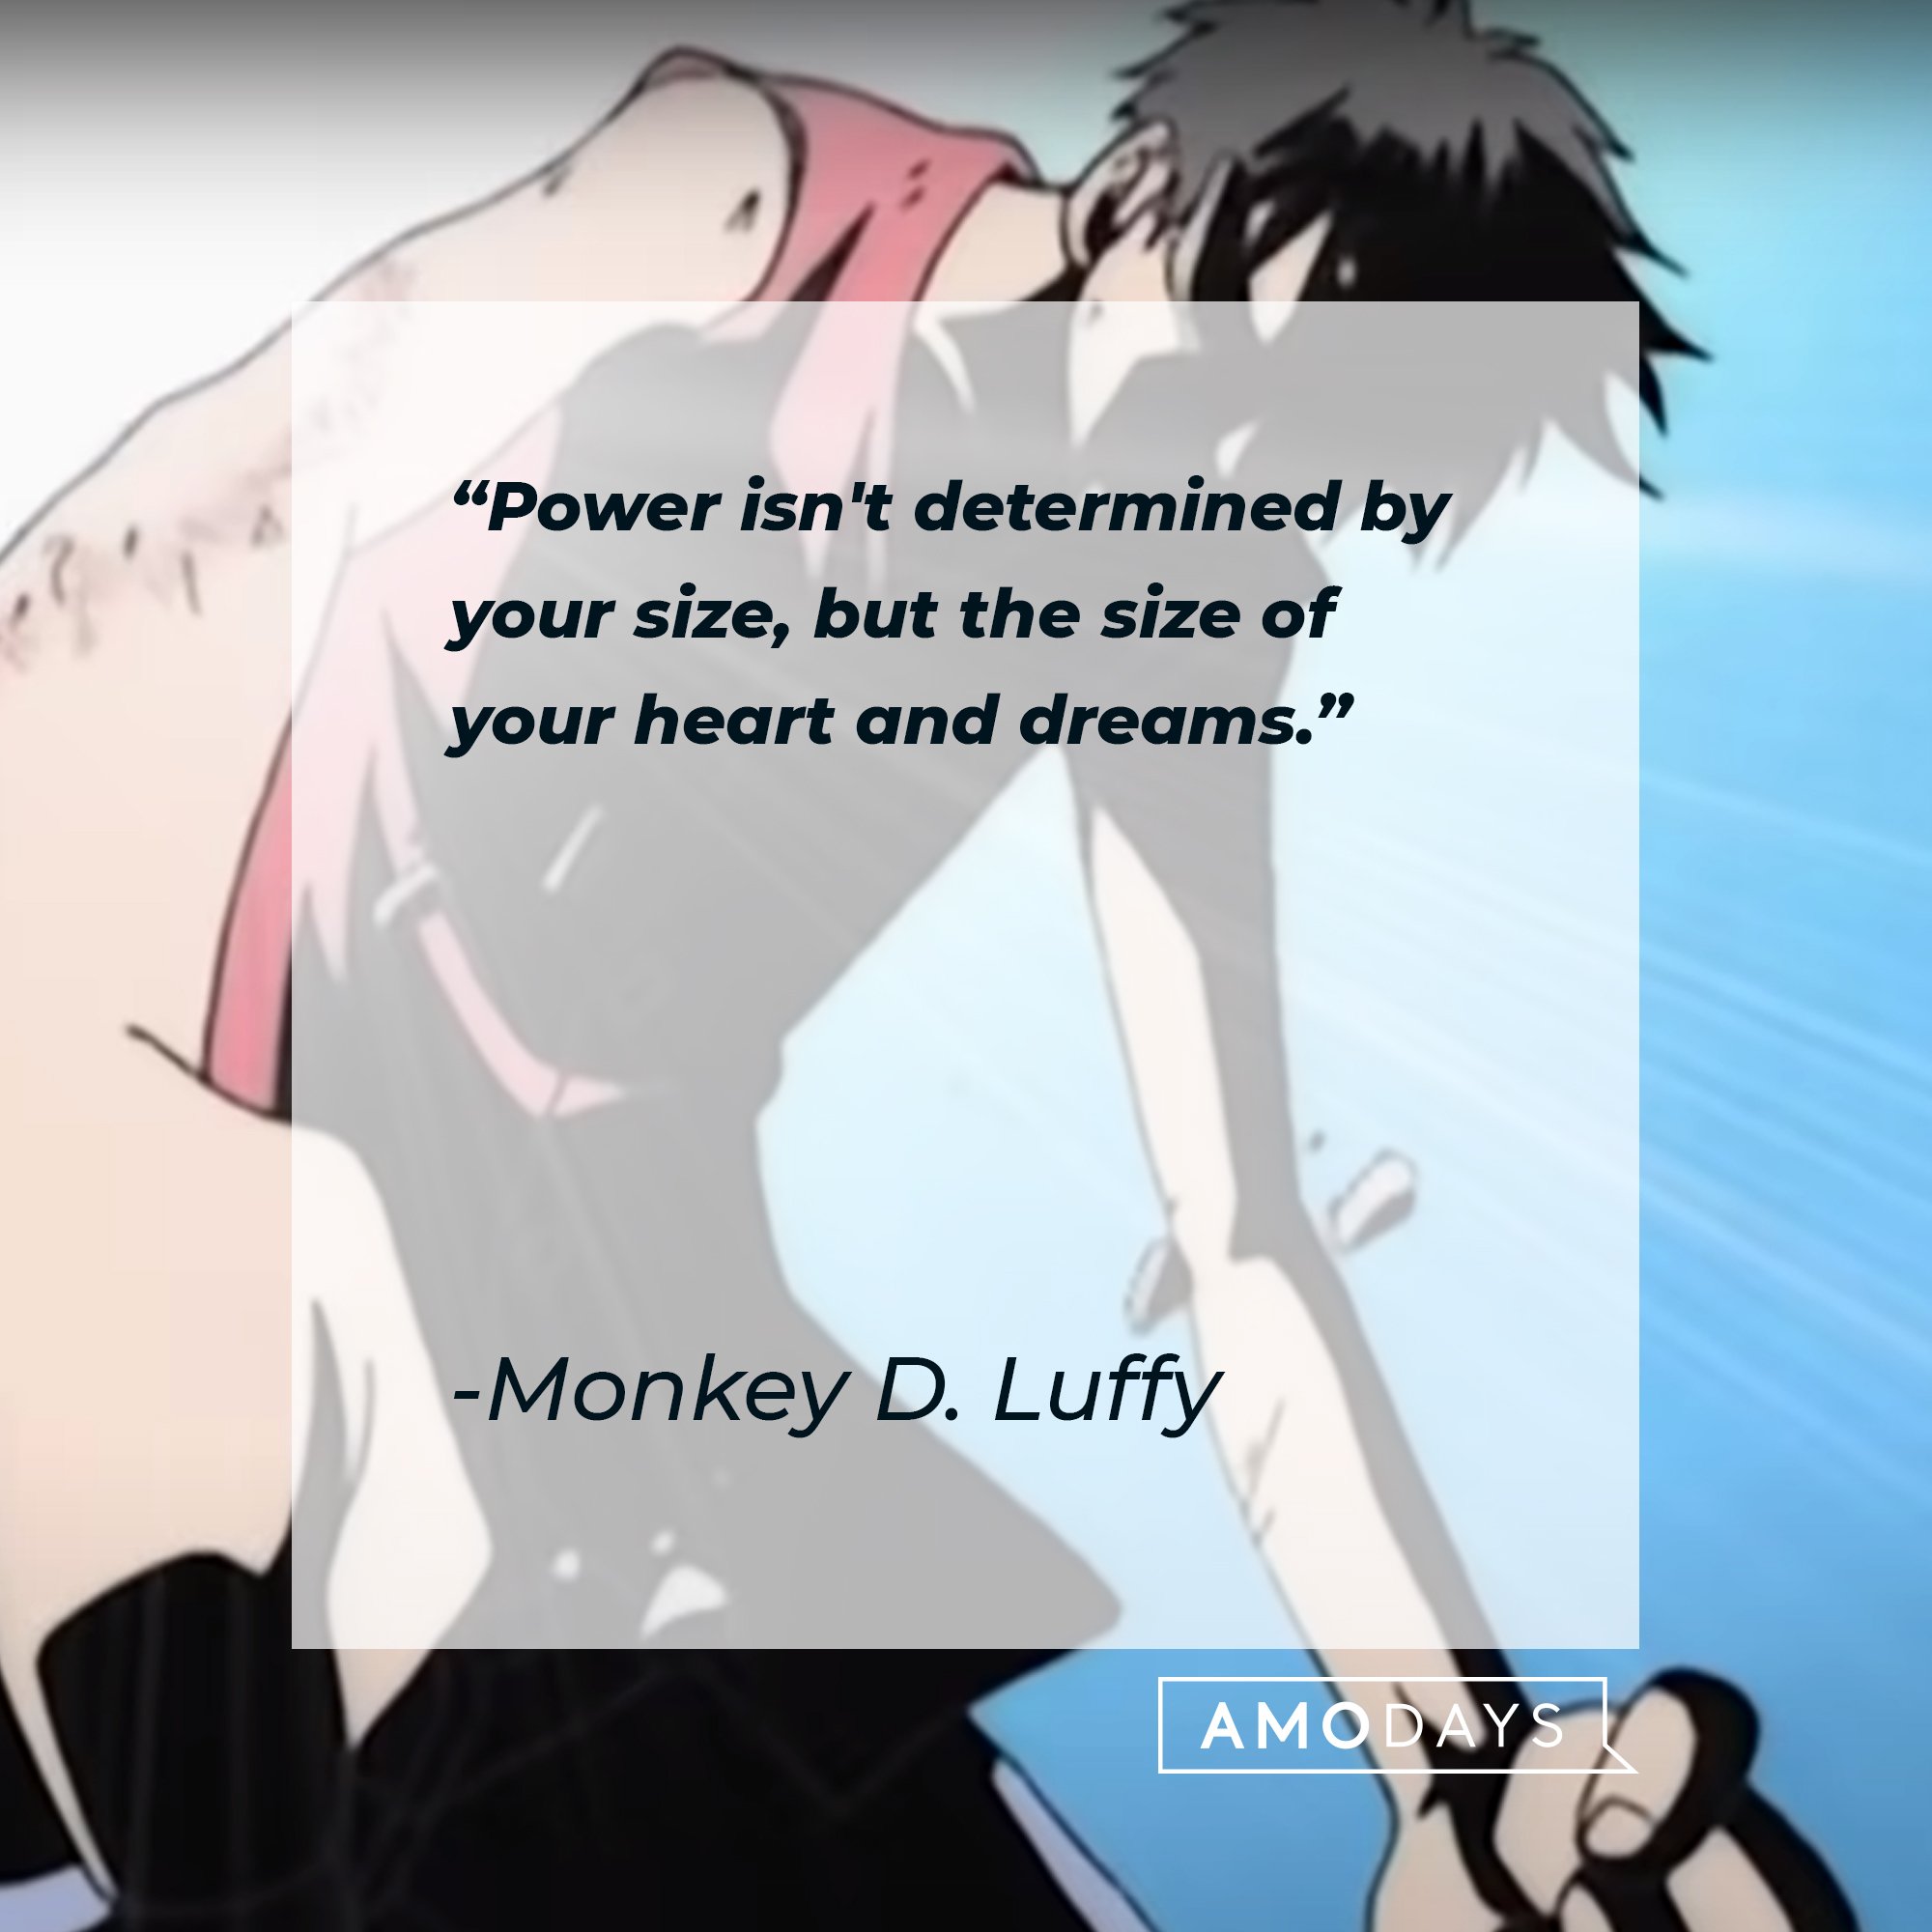 Monkey D. Luffy’s quote: "Power isn't determined by your size, but the size of your heart and dreams." | Image: AmoDays